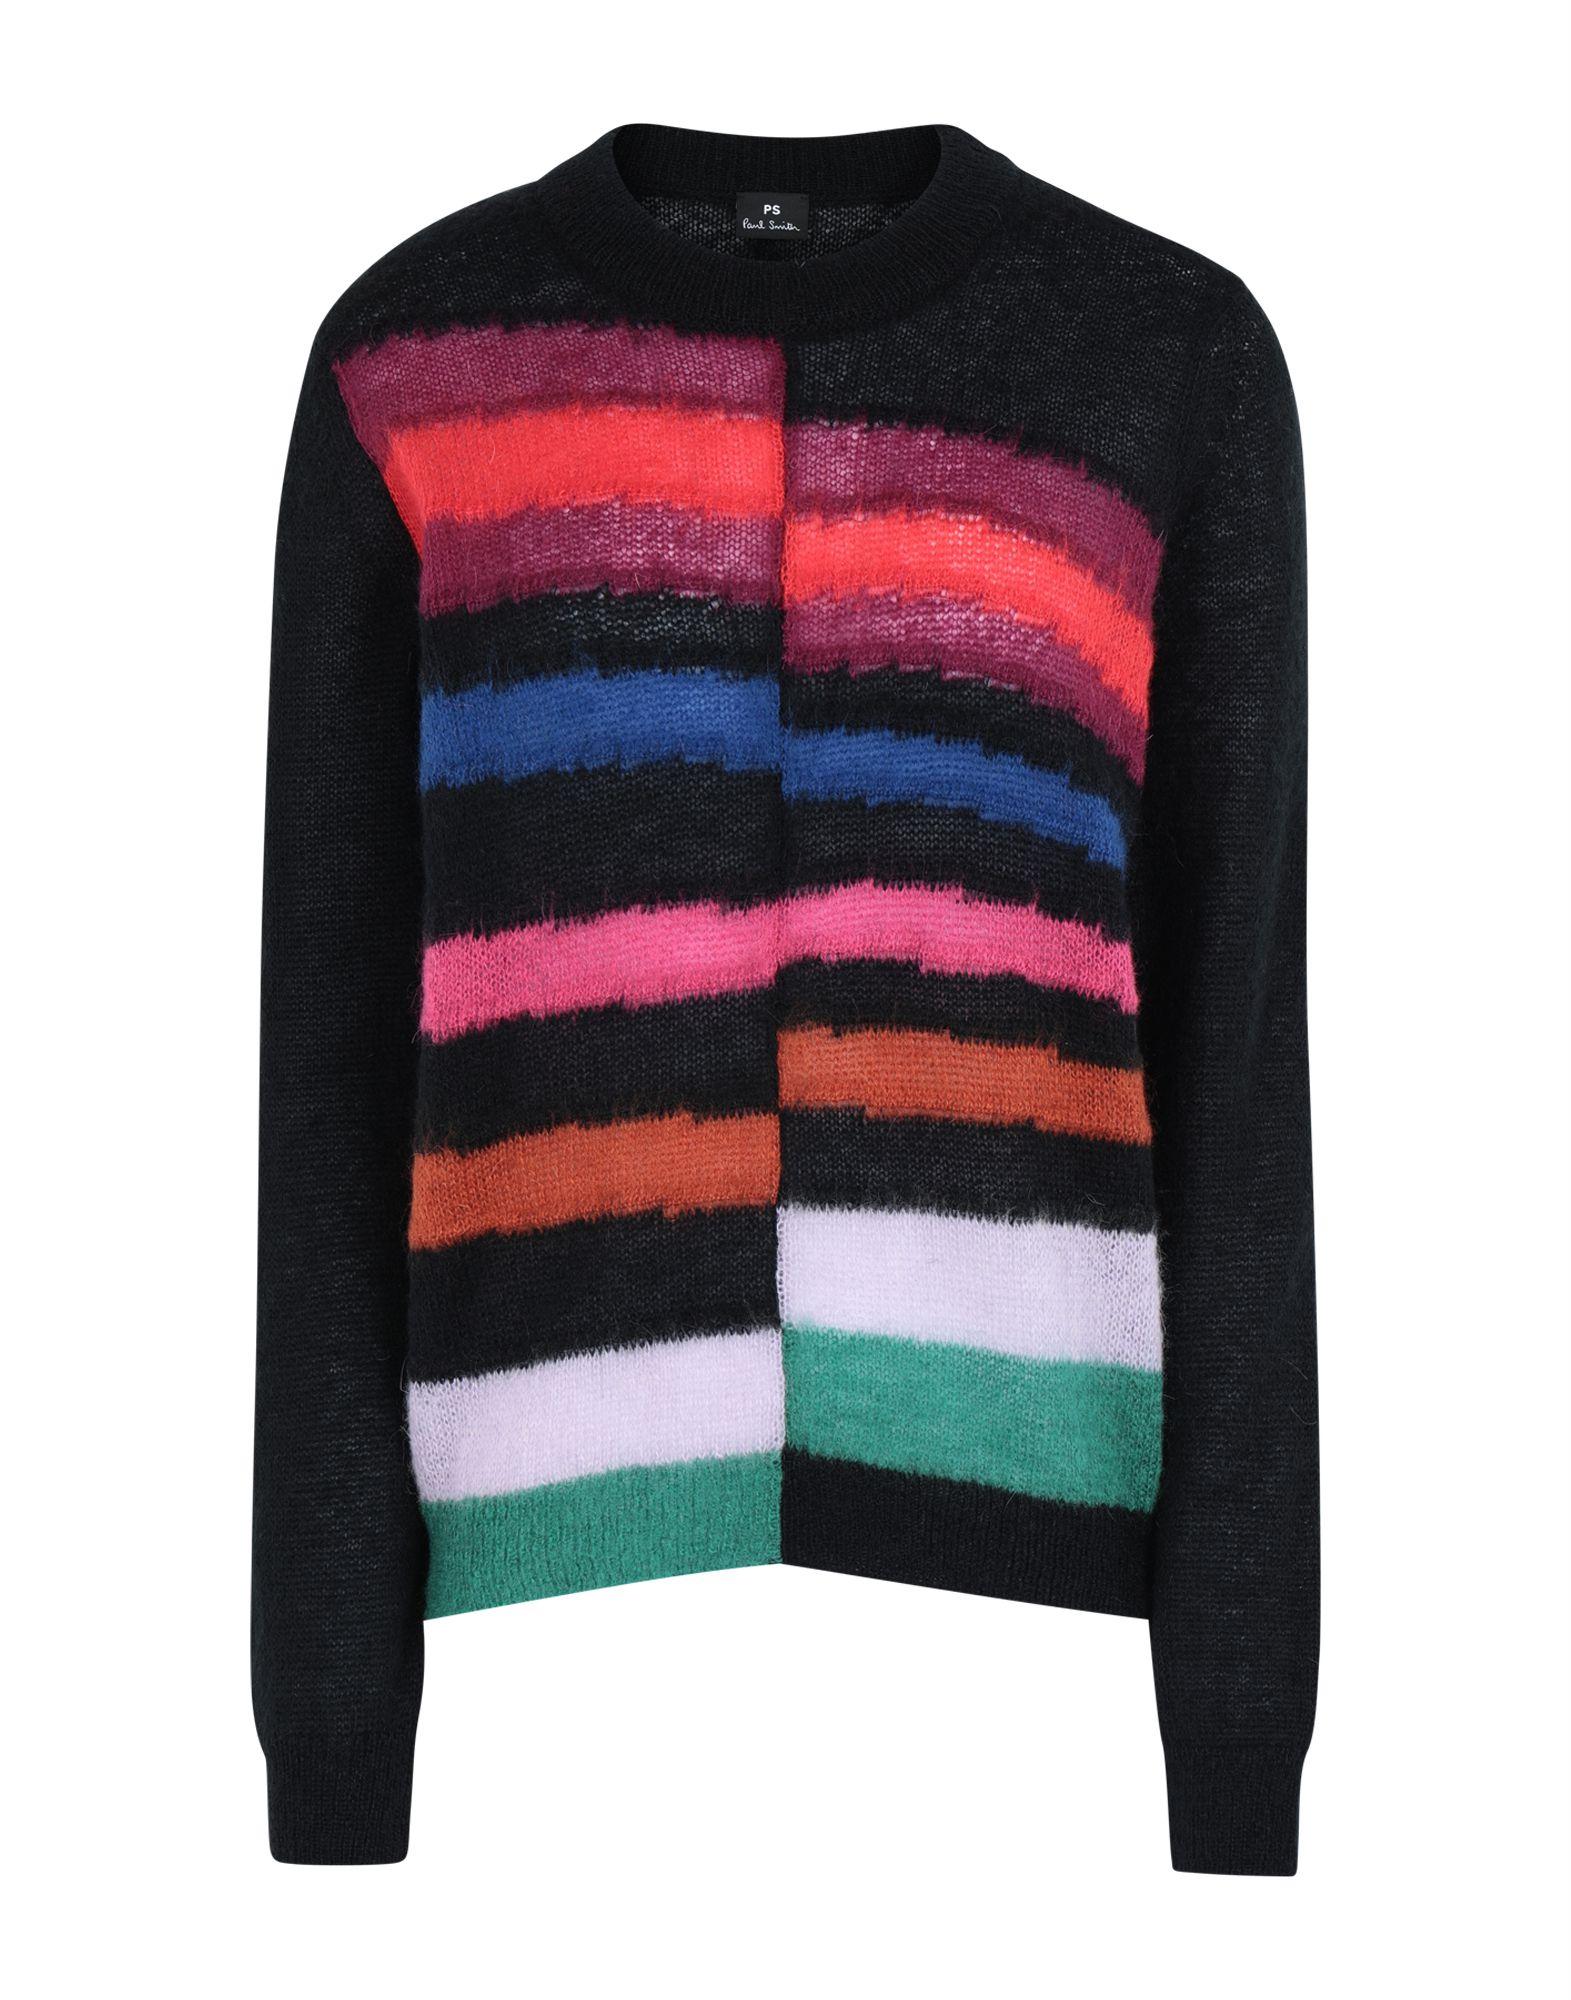 PS by Paul Smith Jumper in Black - Lyst